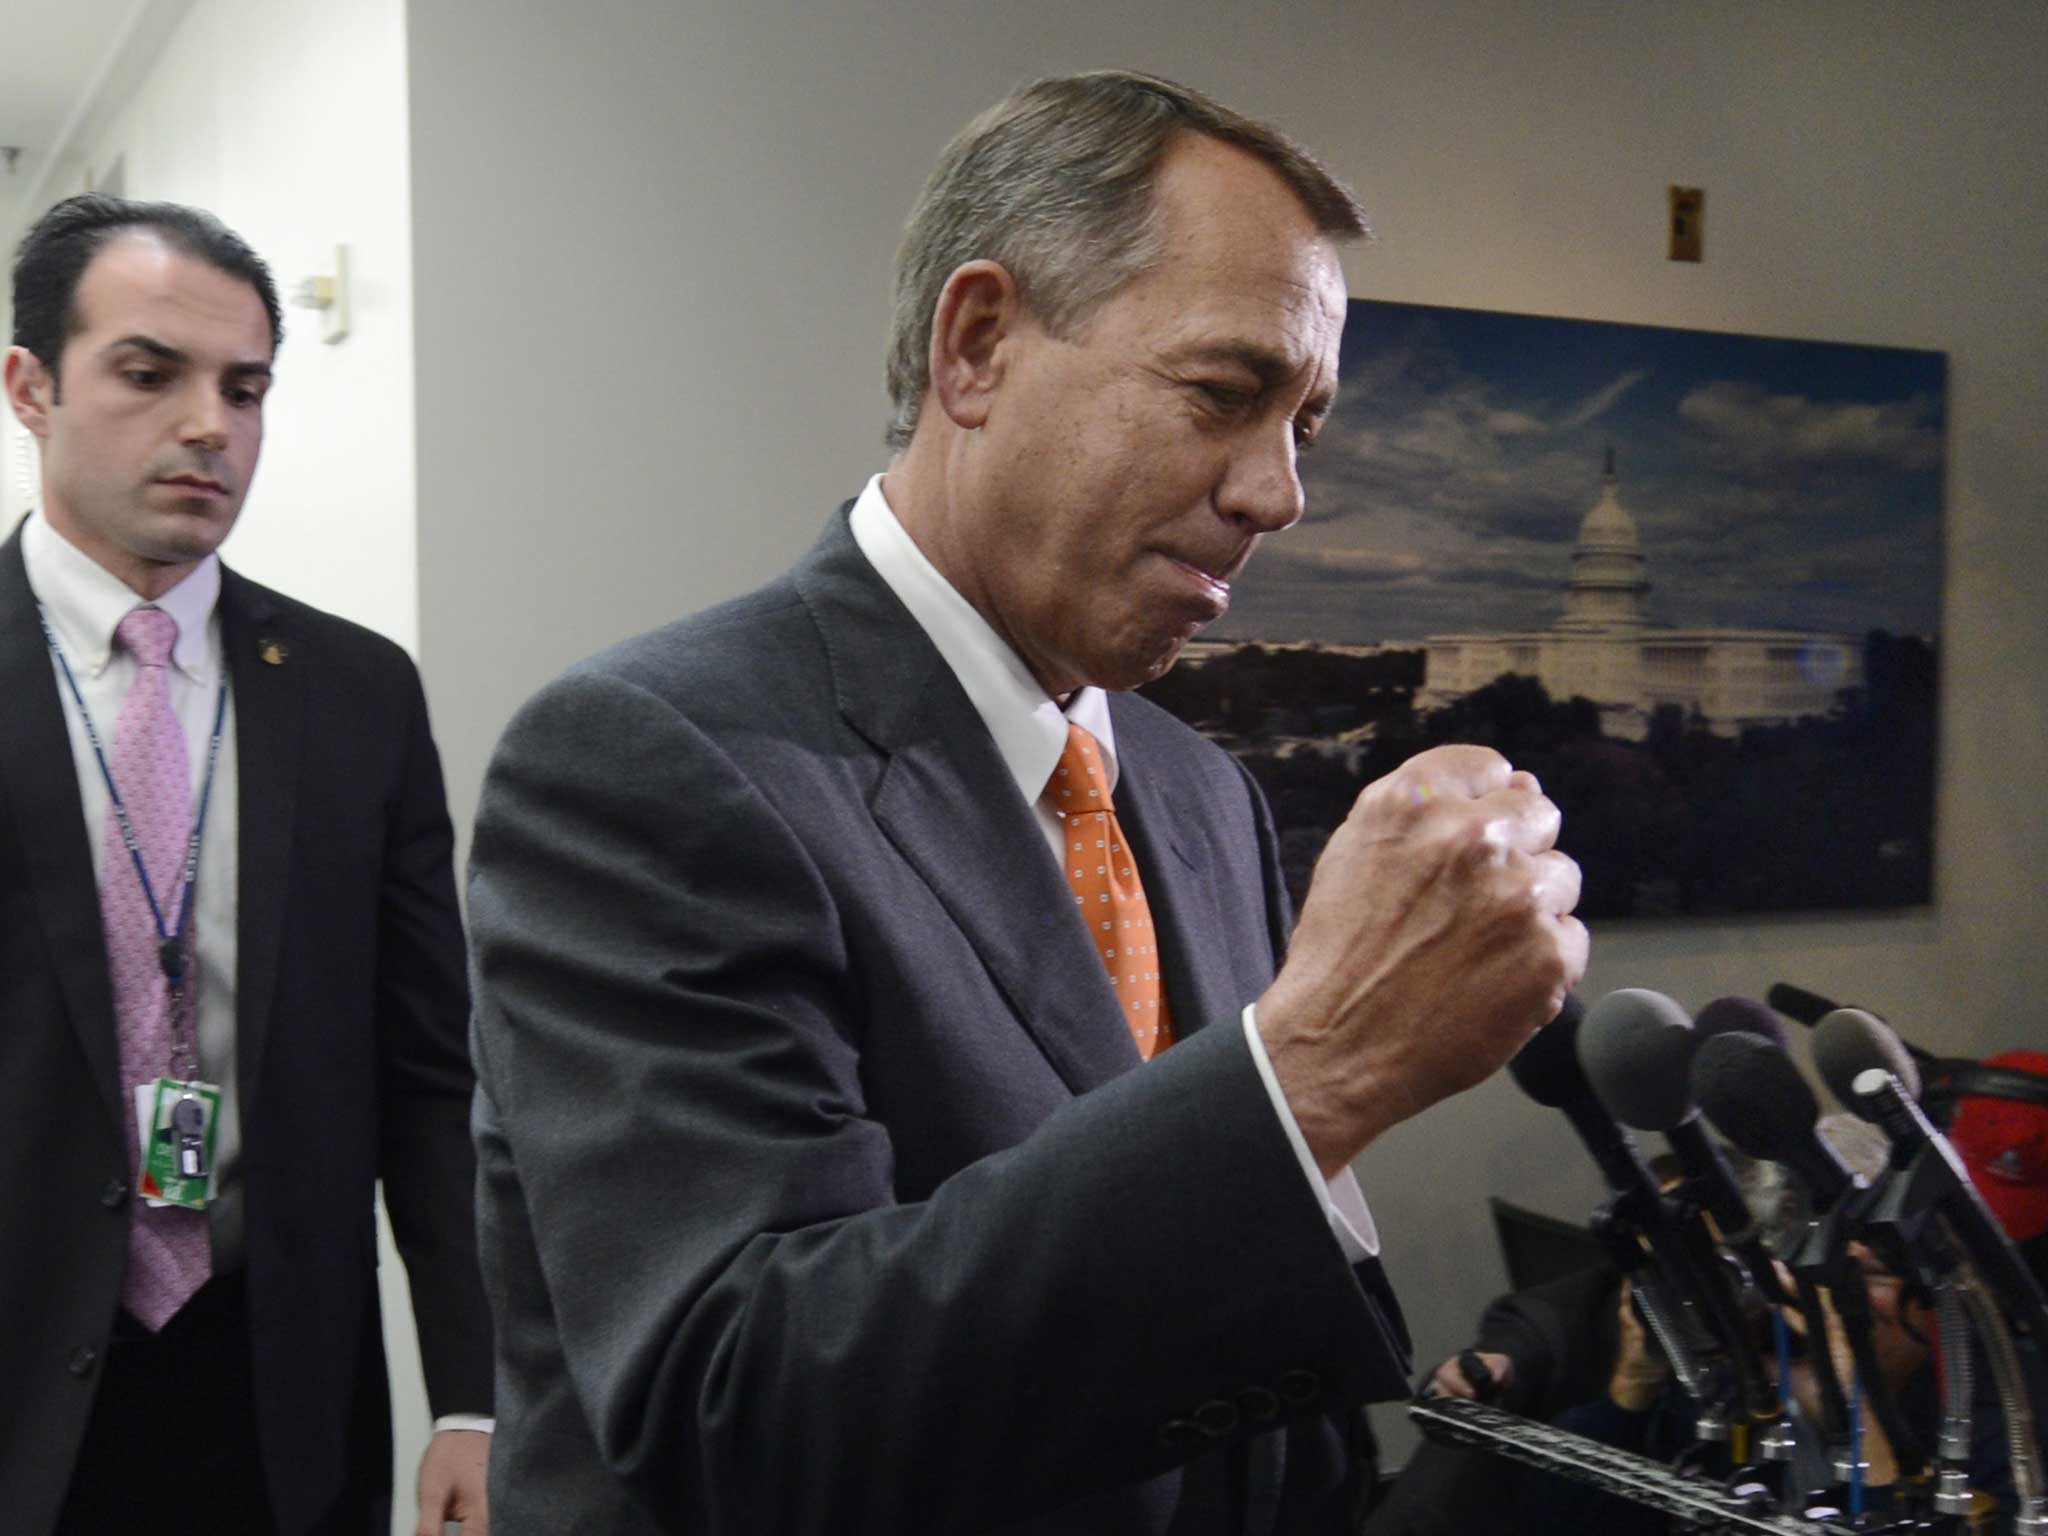 US House Speaker, Republican John Boehner pumps his fist following a House Republican conference meeting